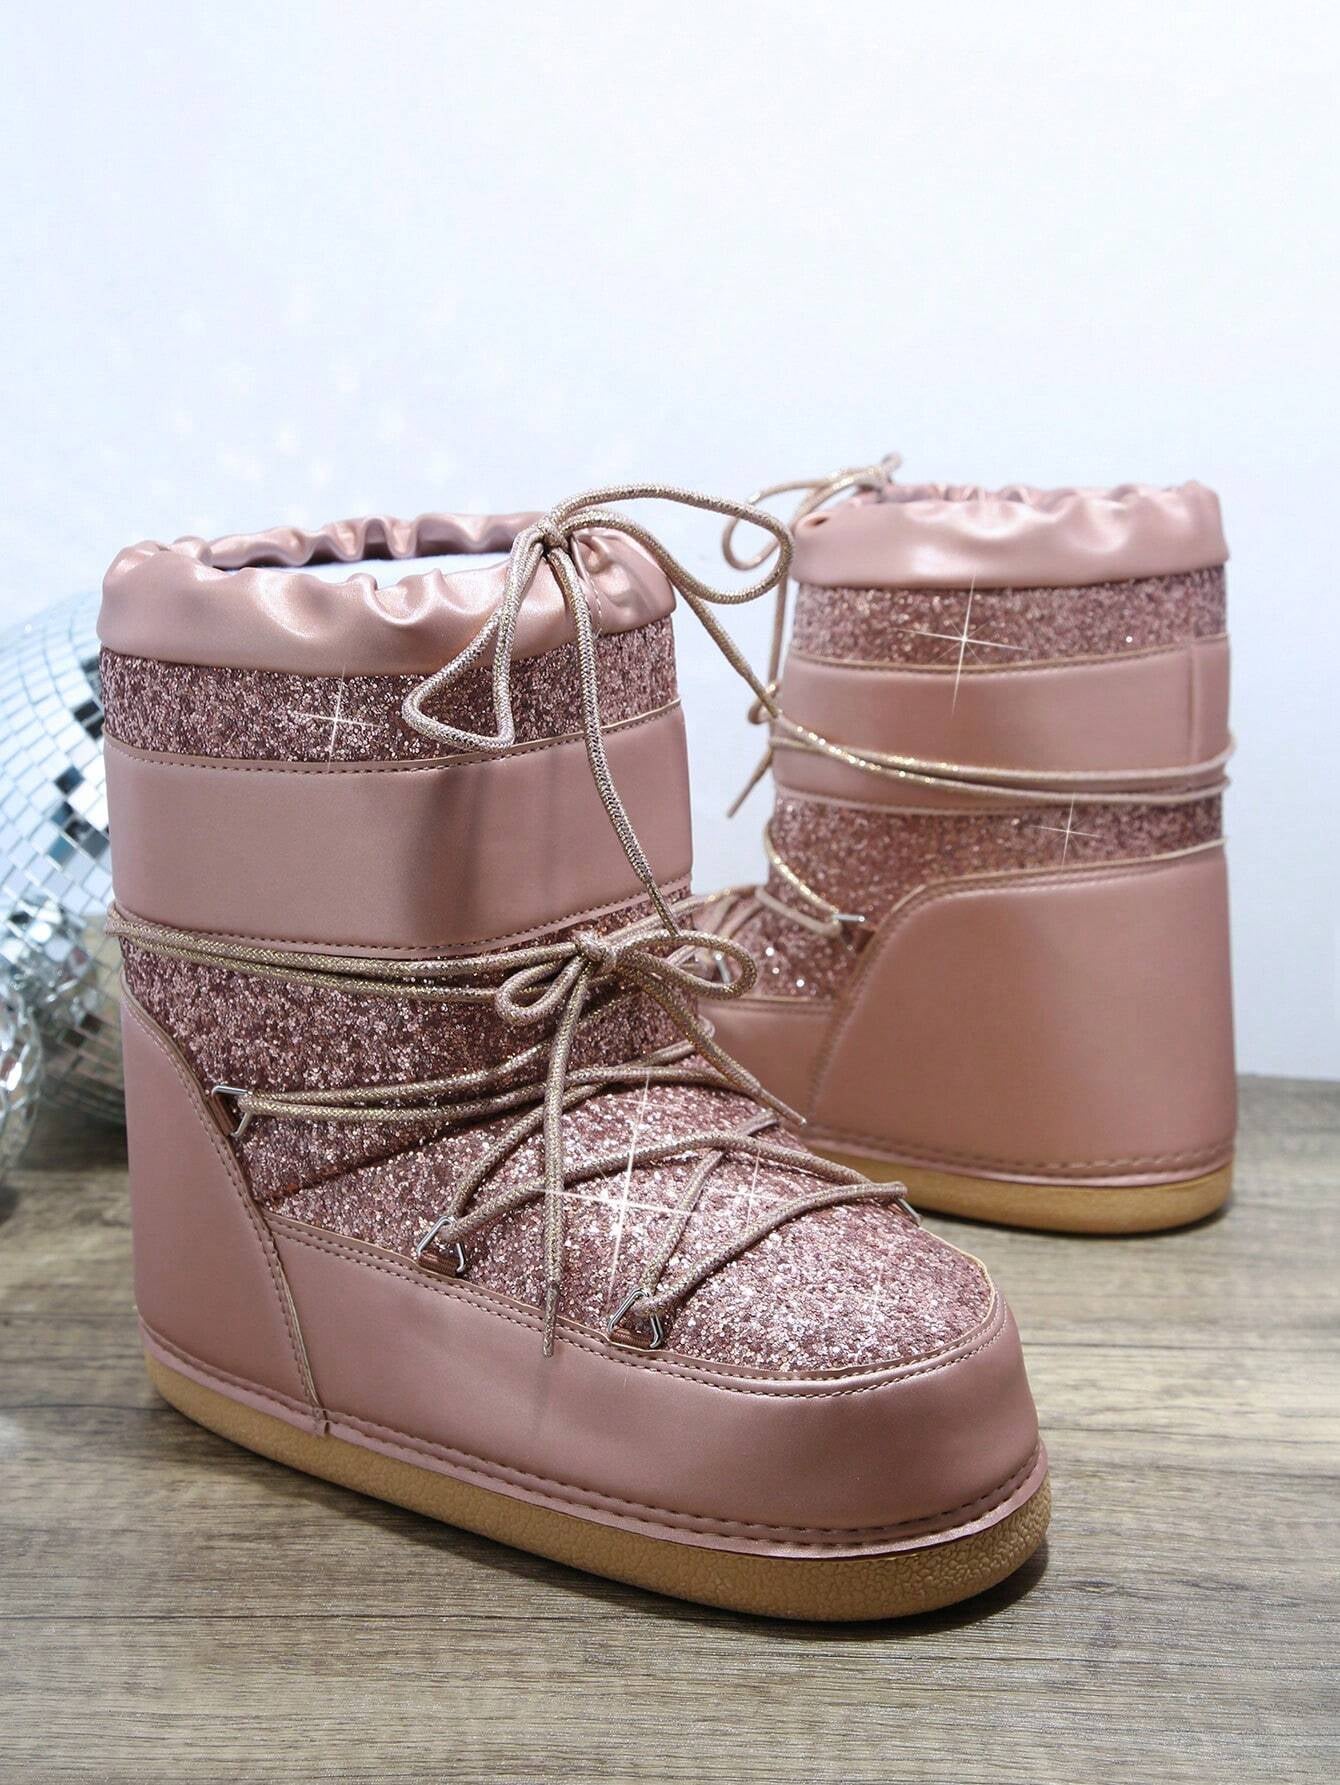 Ankle Boots with Glittery Lace-Up Front.